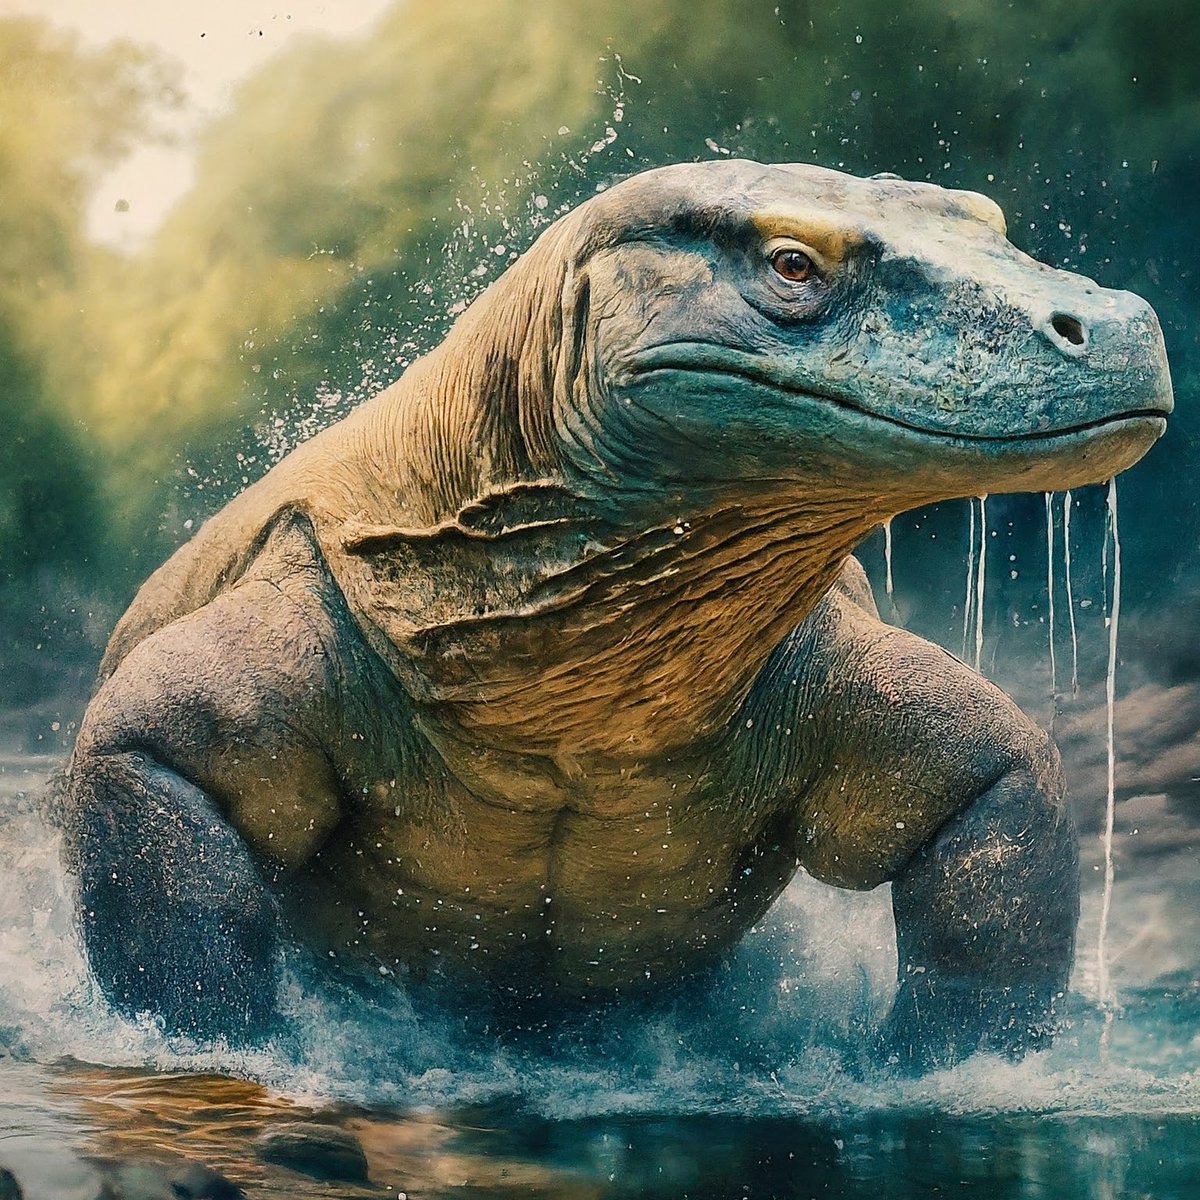 @HUAWEI_TECH4ALL The mighty Komodo dragon, a living relic and apex predator of Indonesia's islands. This ancient reptile reigns supreme in its unique ecosystem, a testament to the wonders of evolution. Created BY Gemini AI🐉 #KomodoDragon #Indonesia #Tech4Nature